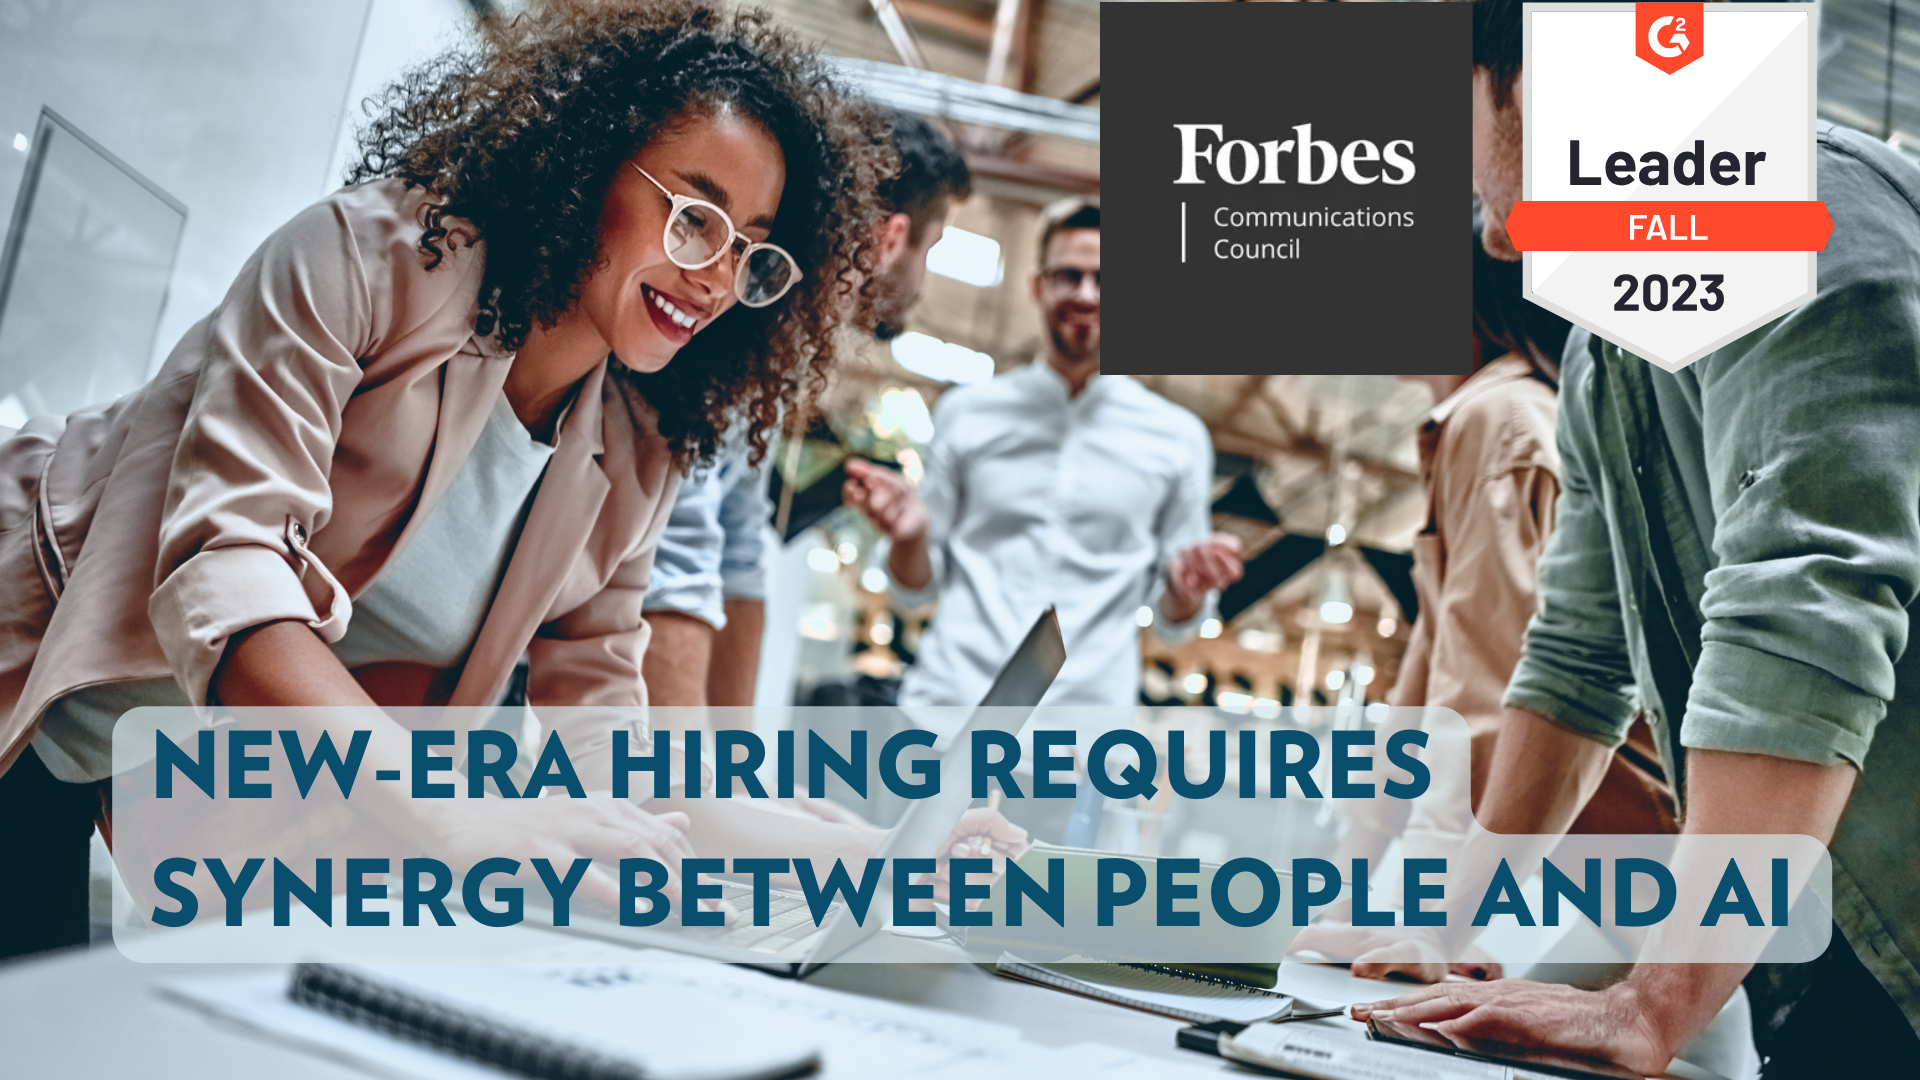 New-Era Hiring Requires Synergy Between People And AI